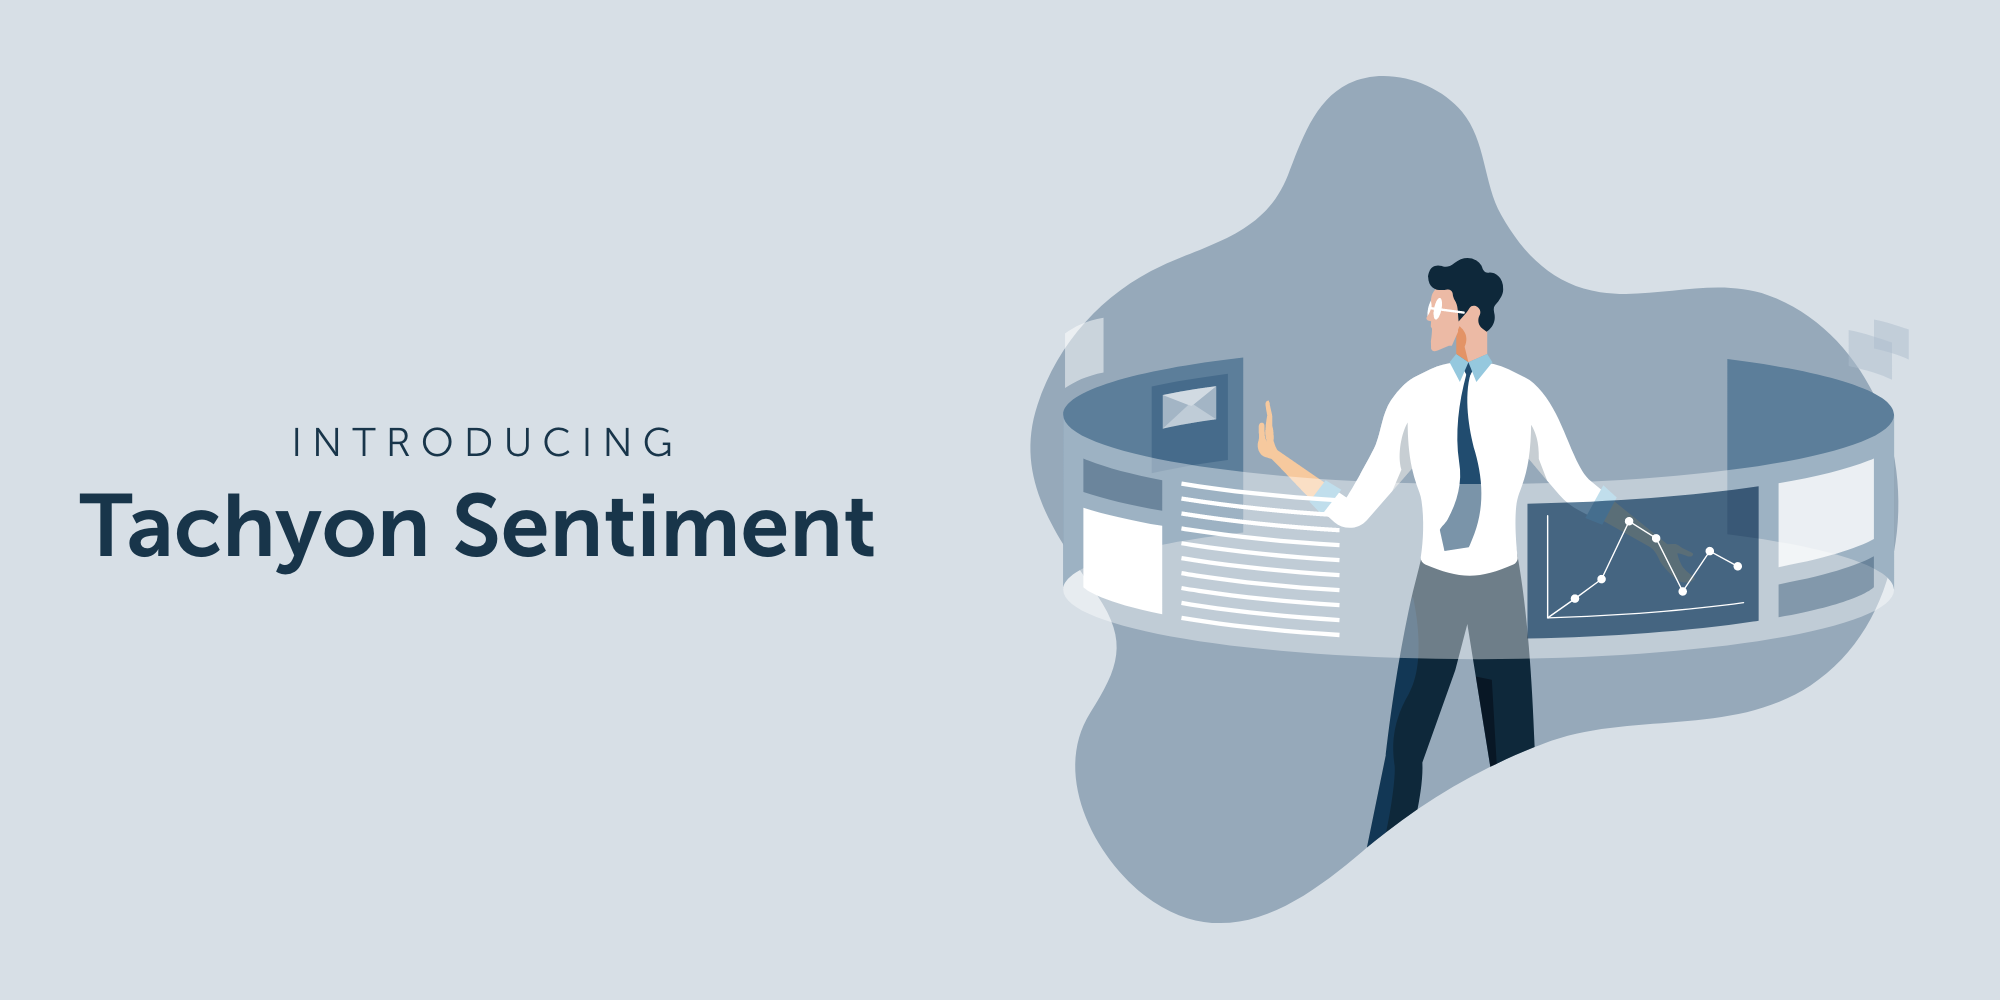 1E launches Tachyon sentiment to give employees a voice about their digital experience